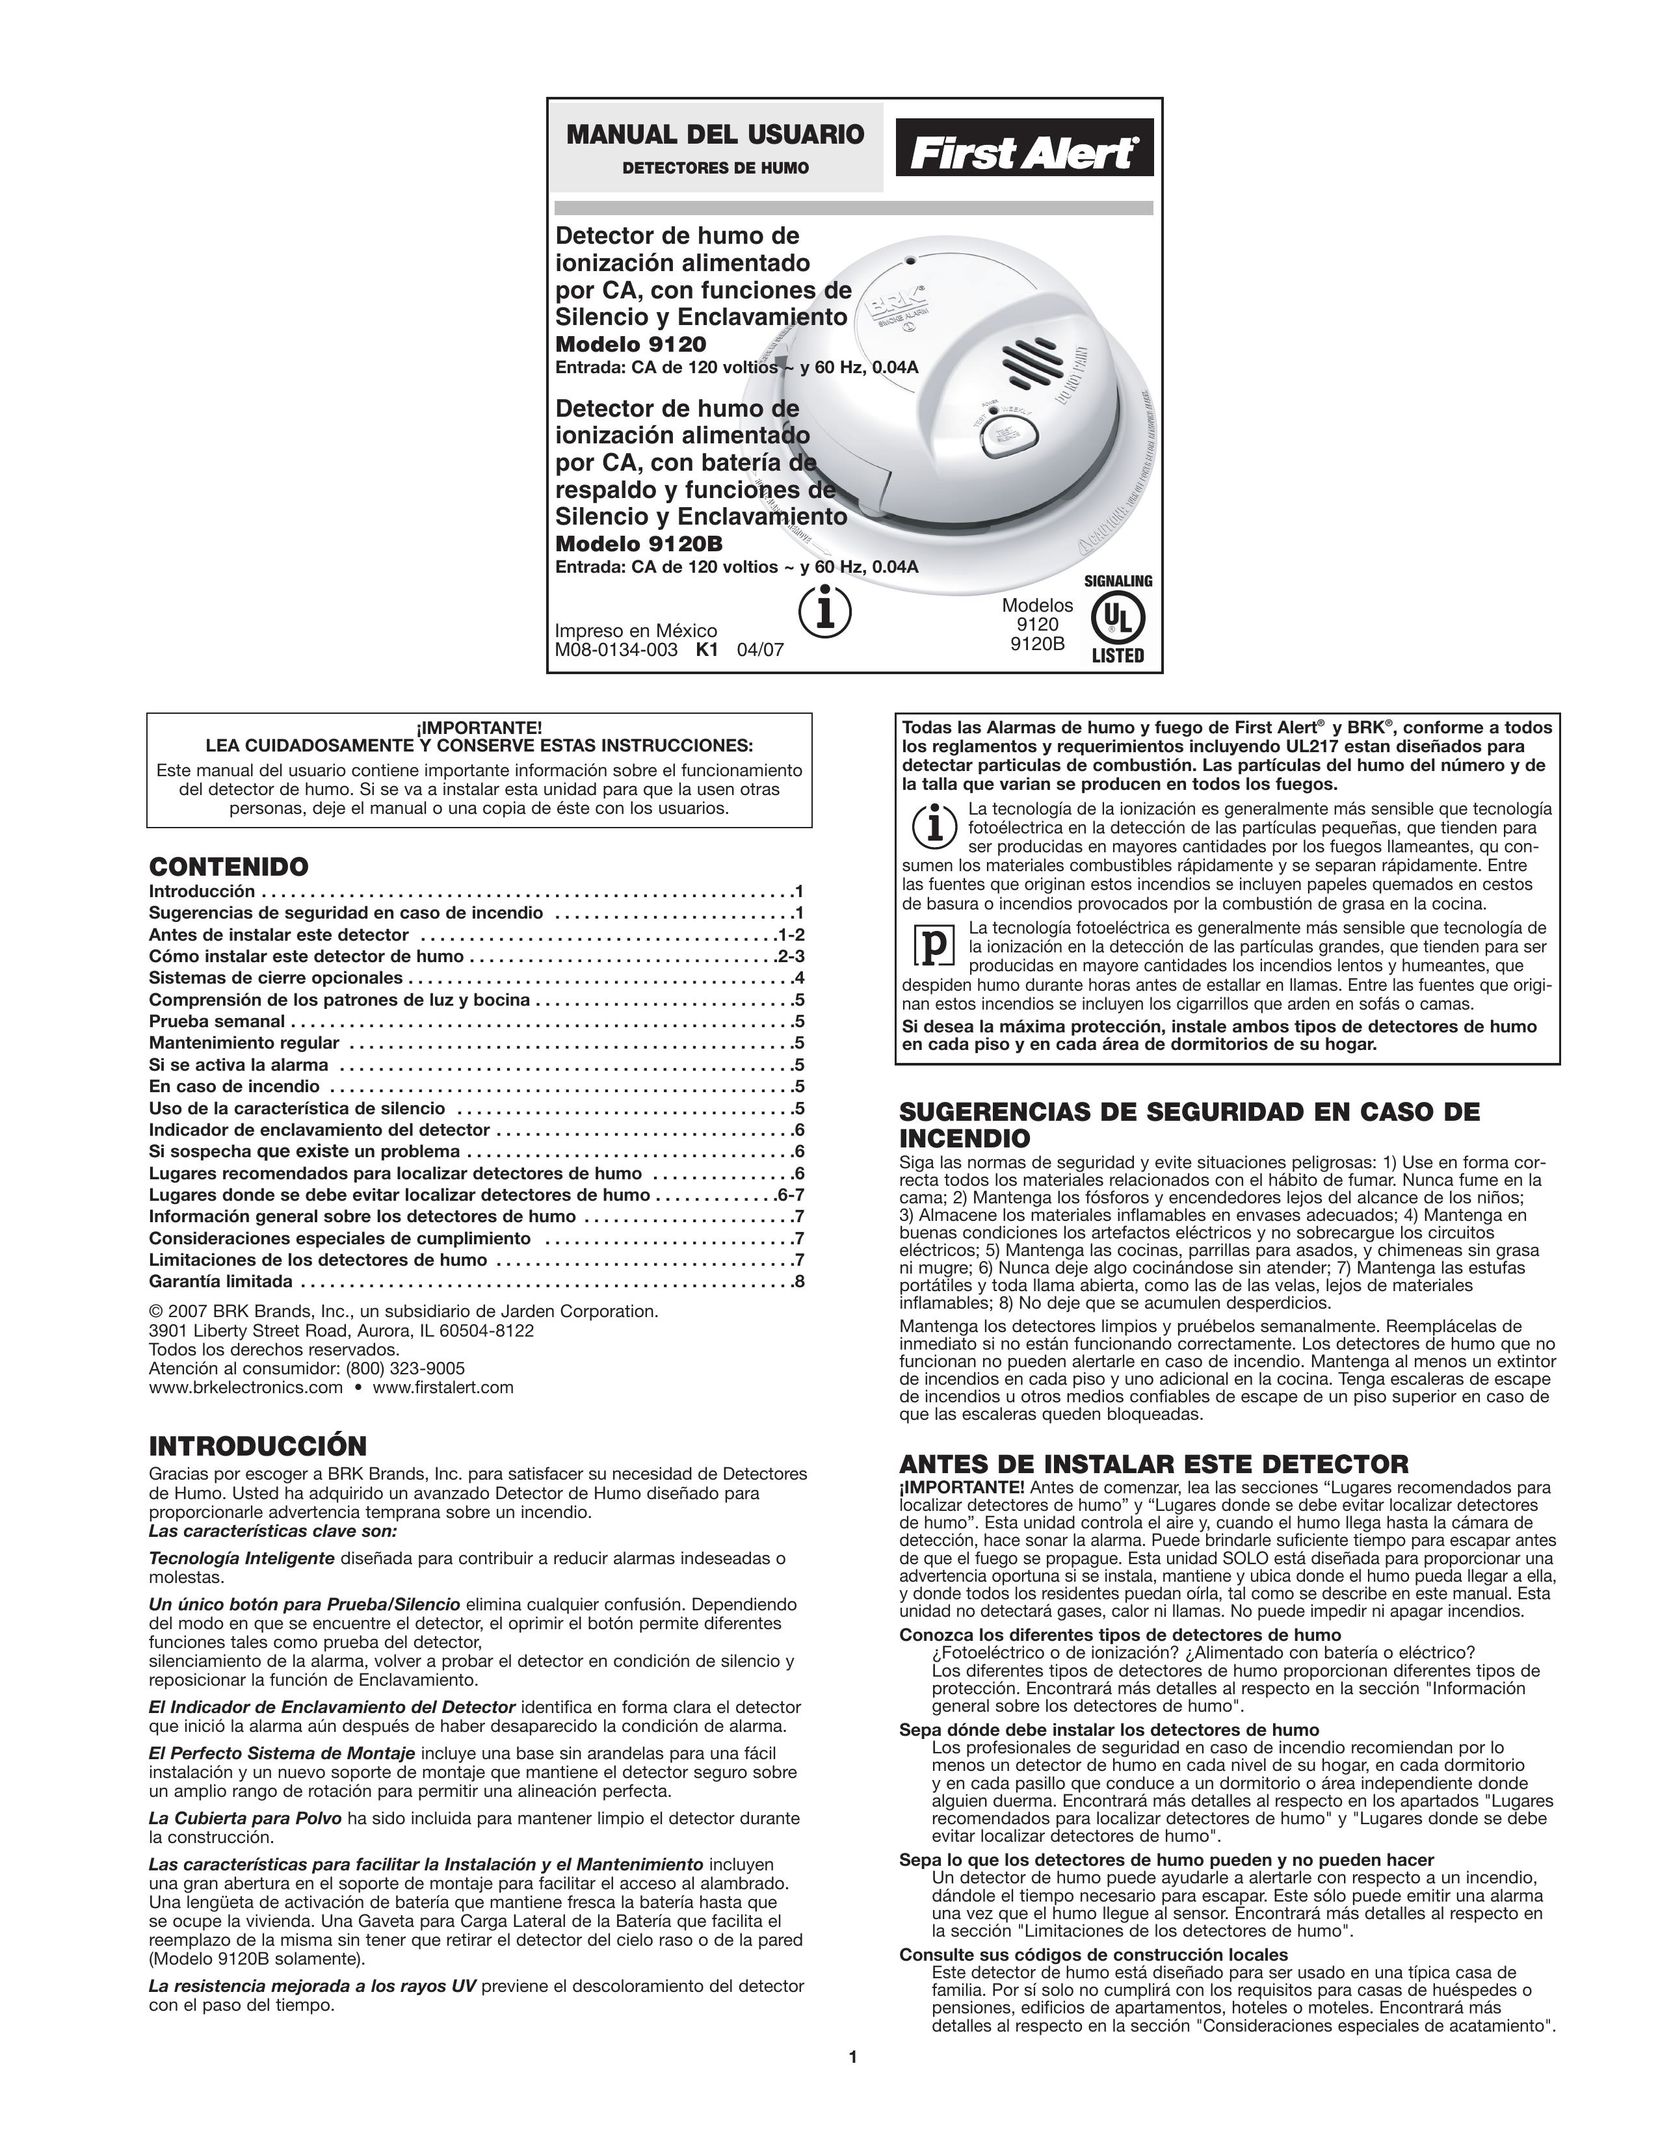 First Alert 9120B All in One Printer User Manual